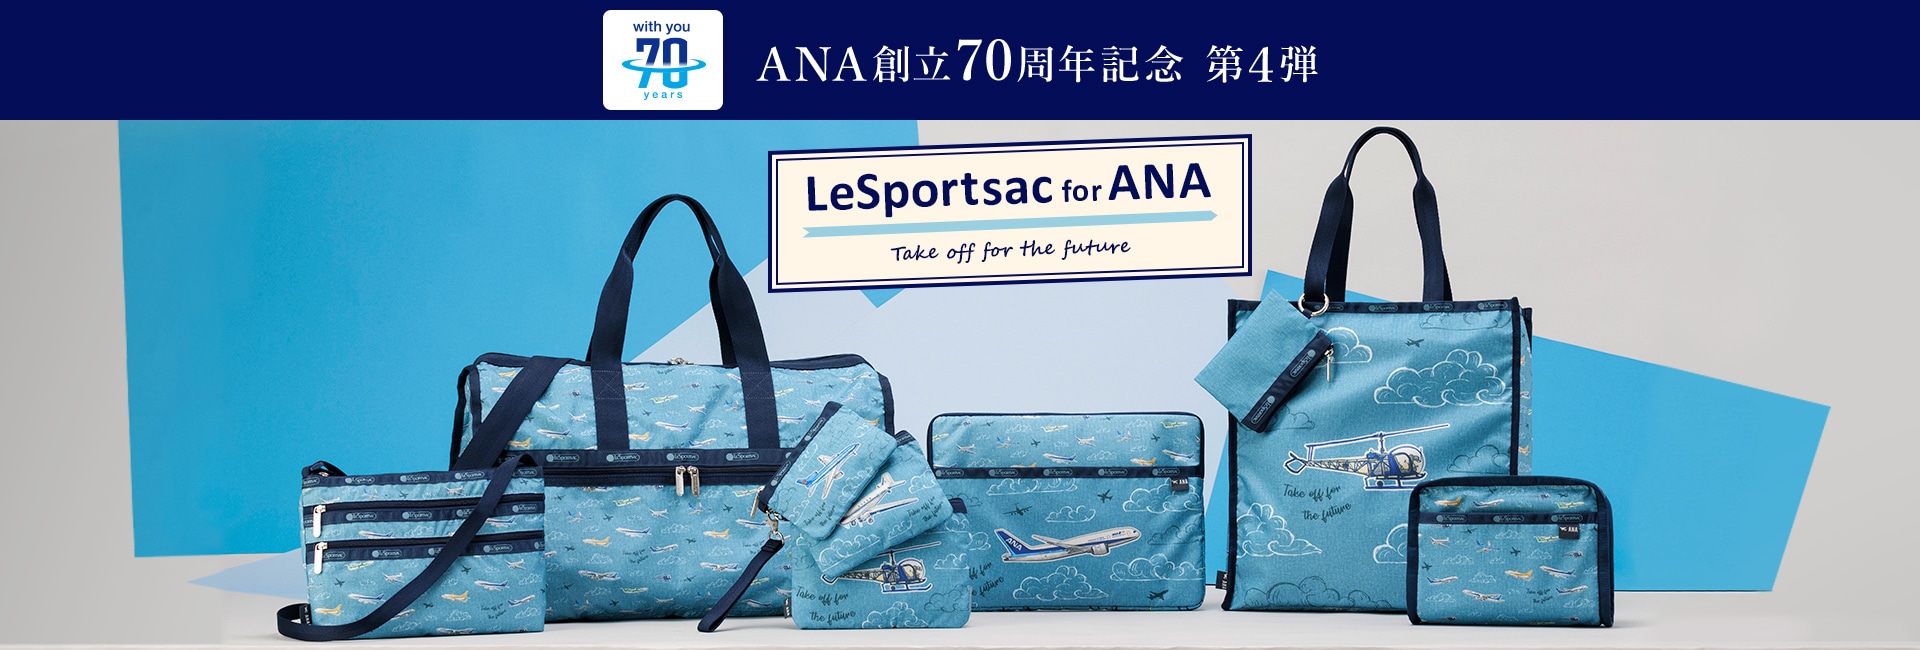 with you 70 years ANA創立70周年記念 第４弾 LeSportsac for ANA Take off for the future